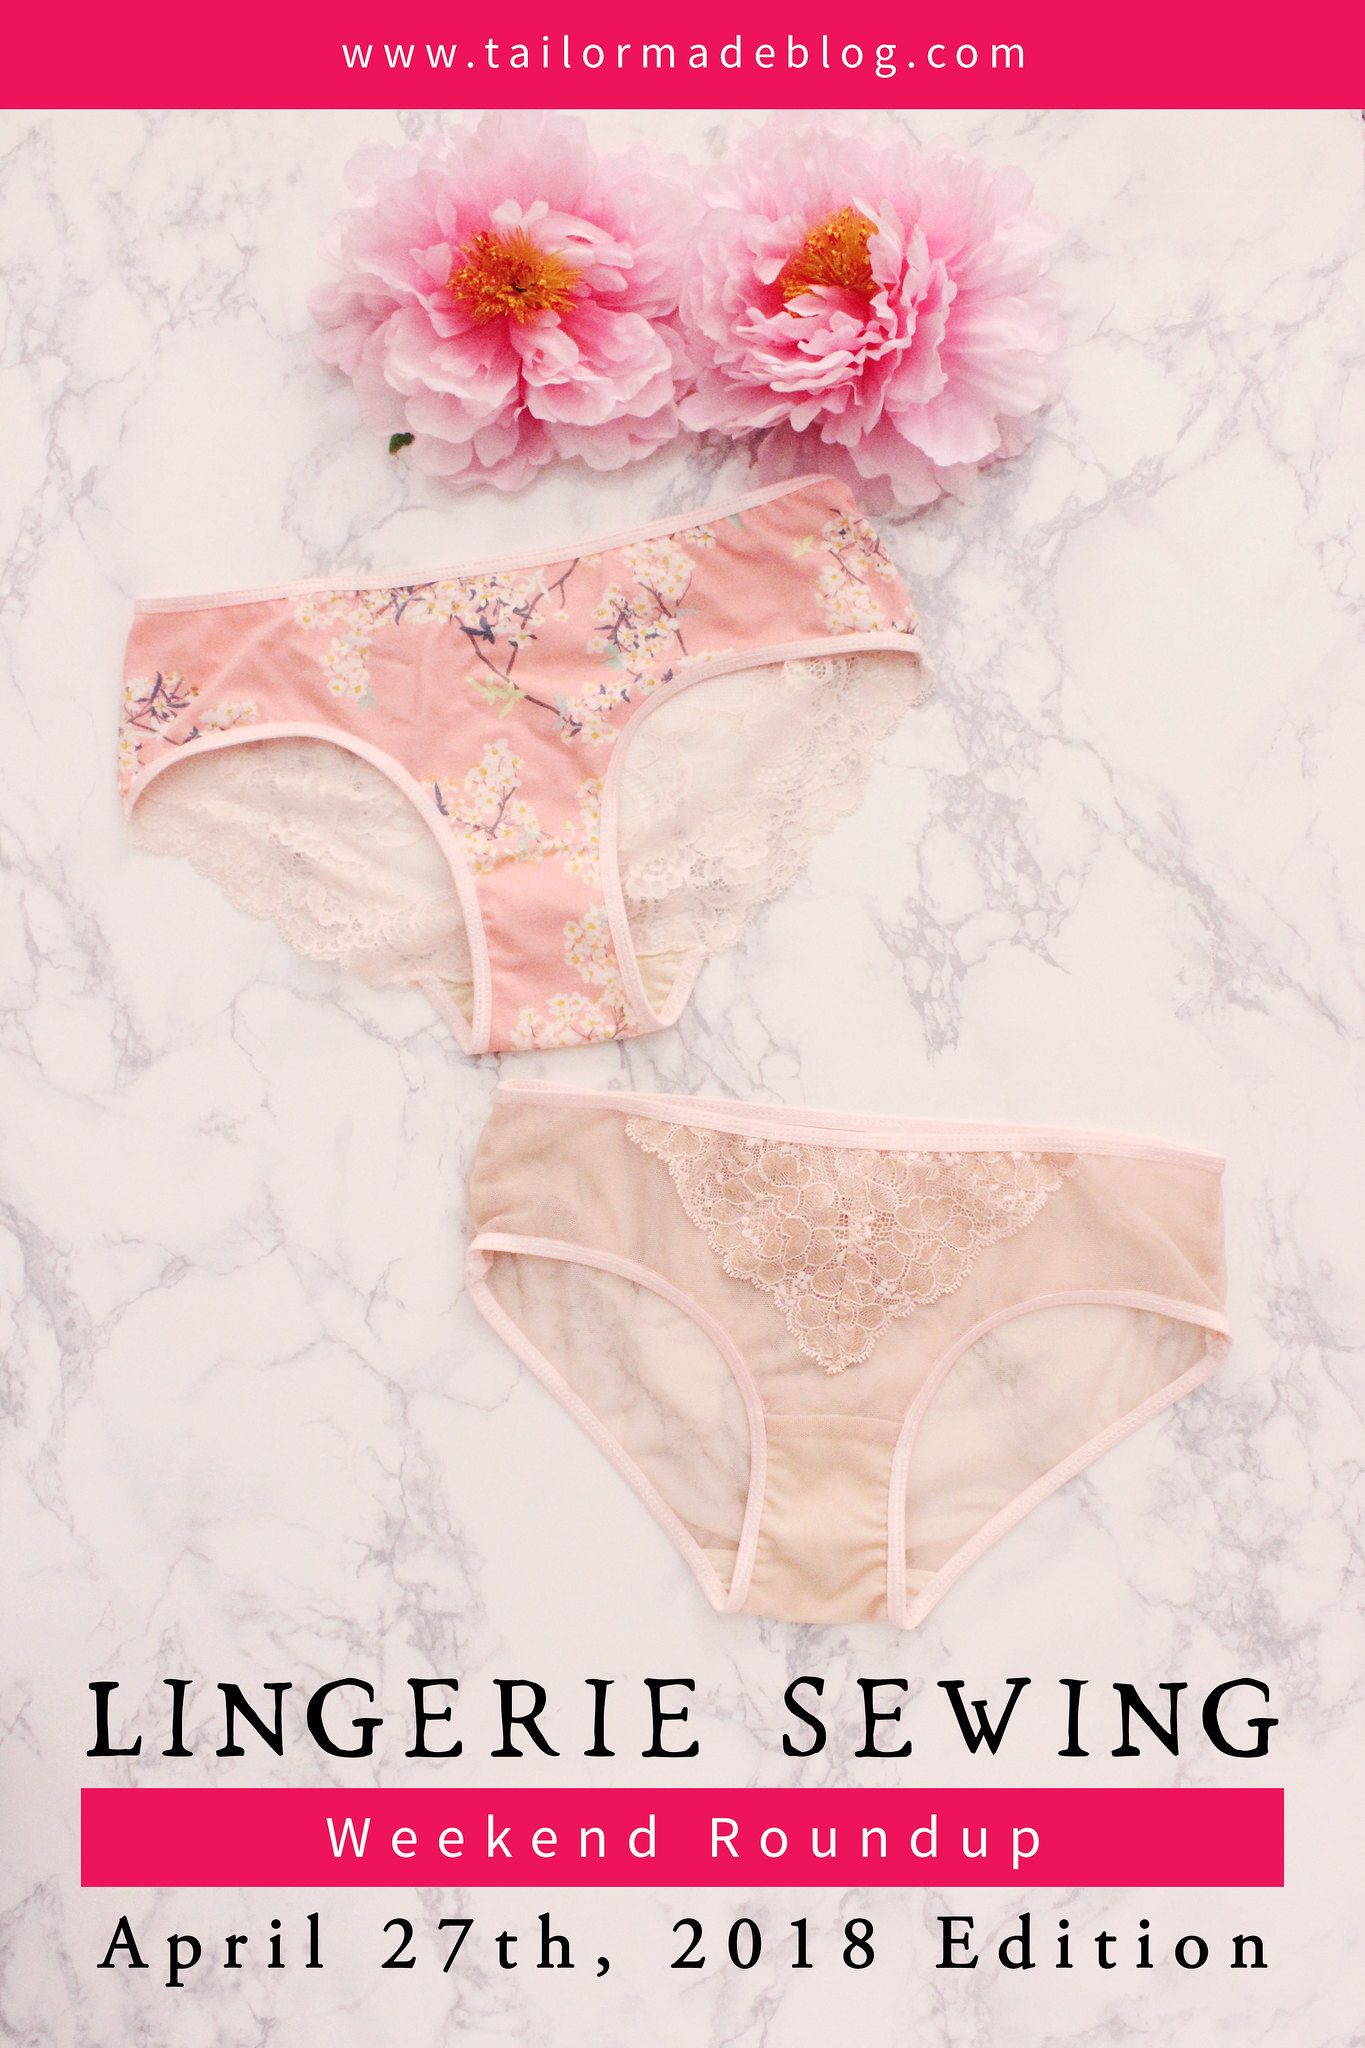 April 27th, 2018 Lingerie Sewing Weekend Round Up Latest news and makes and sewing projects from the lingerie sewing bra making community